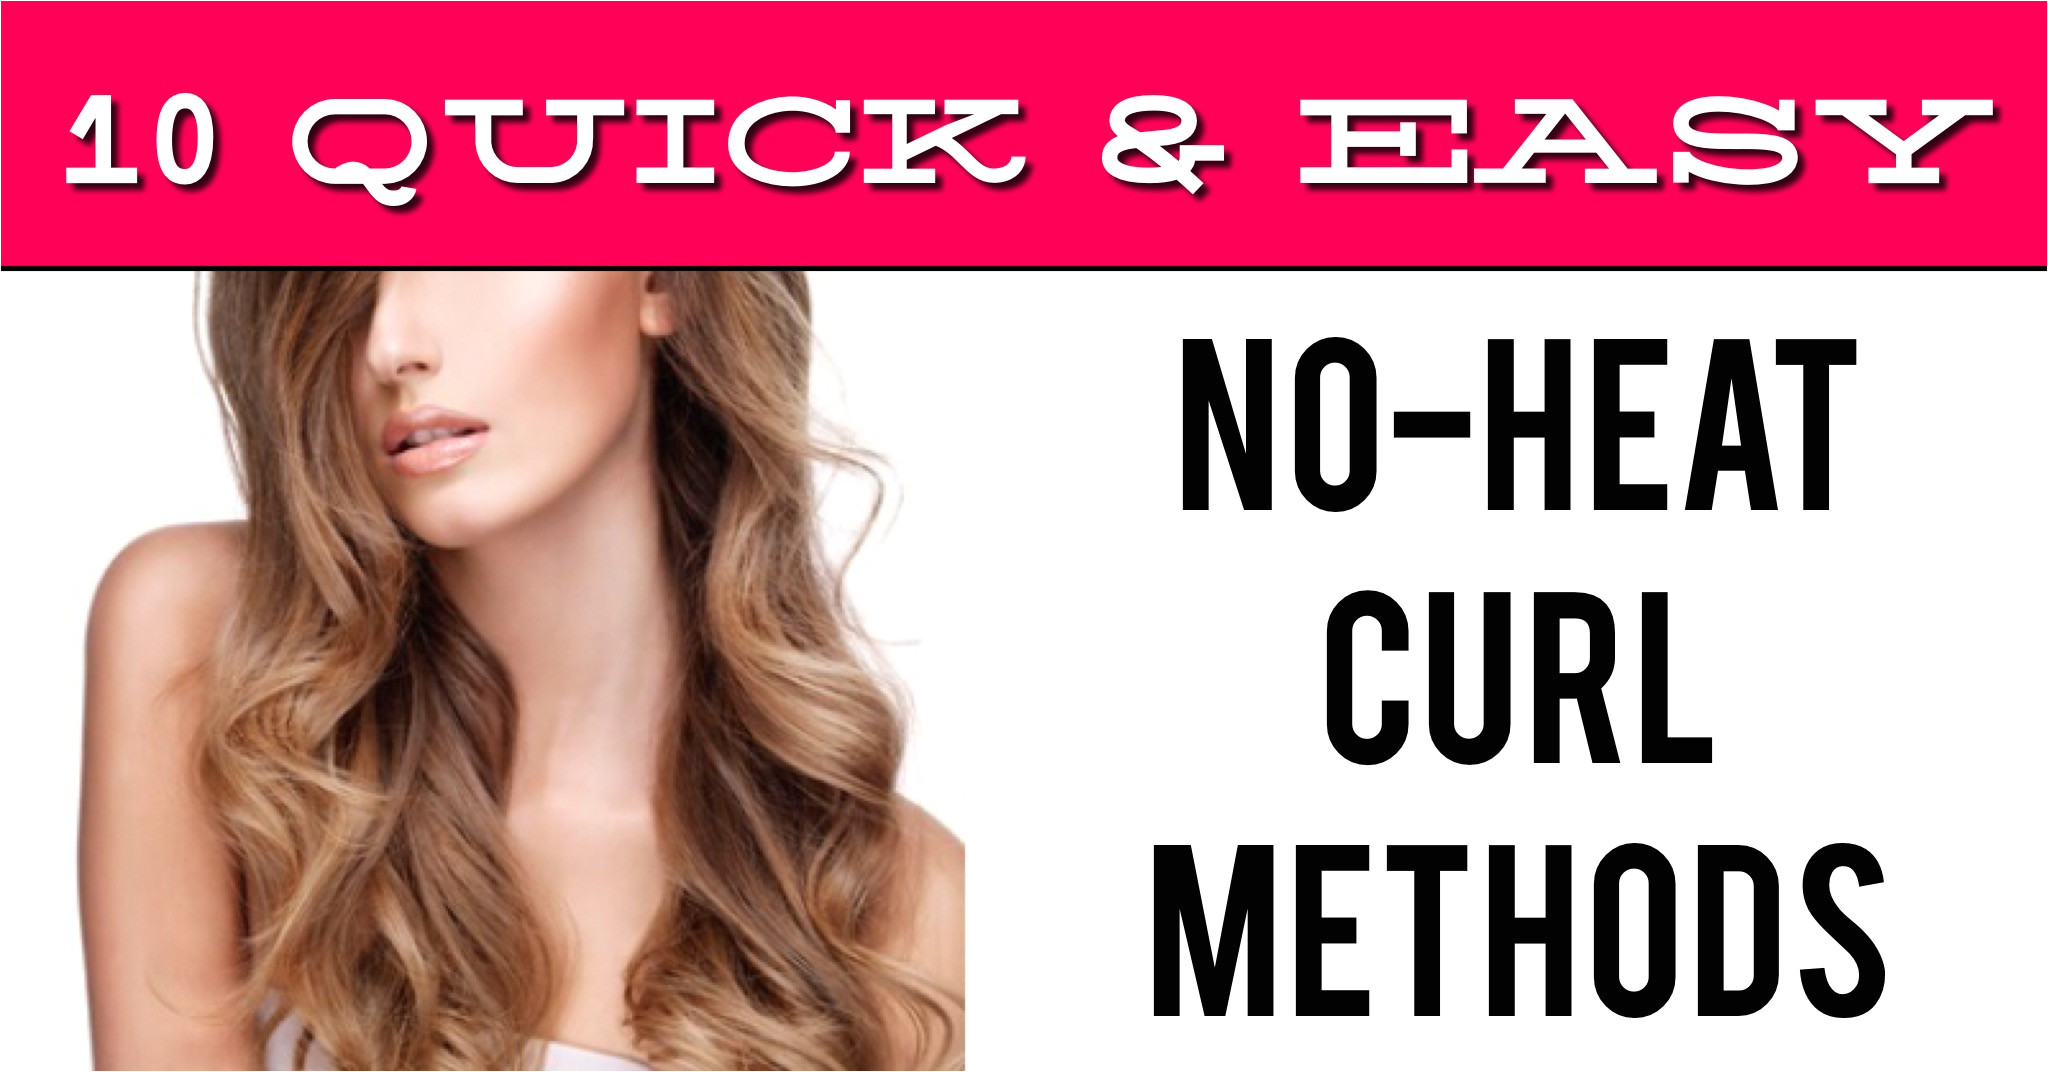 10 Quick and Easy ways to curl your hair without HEAT